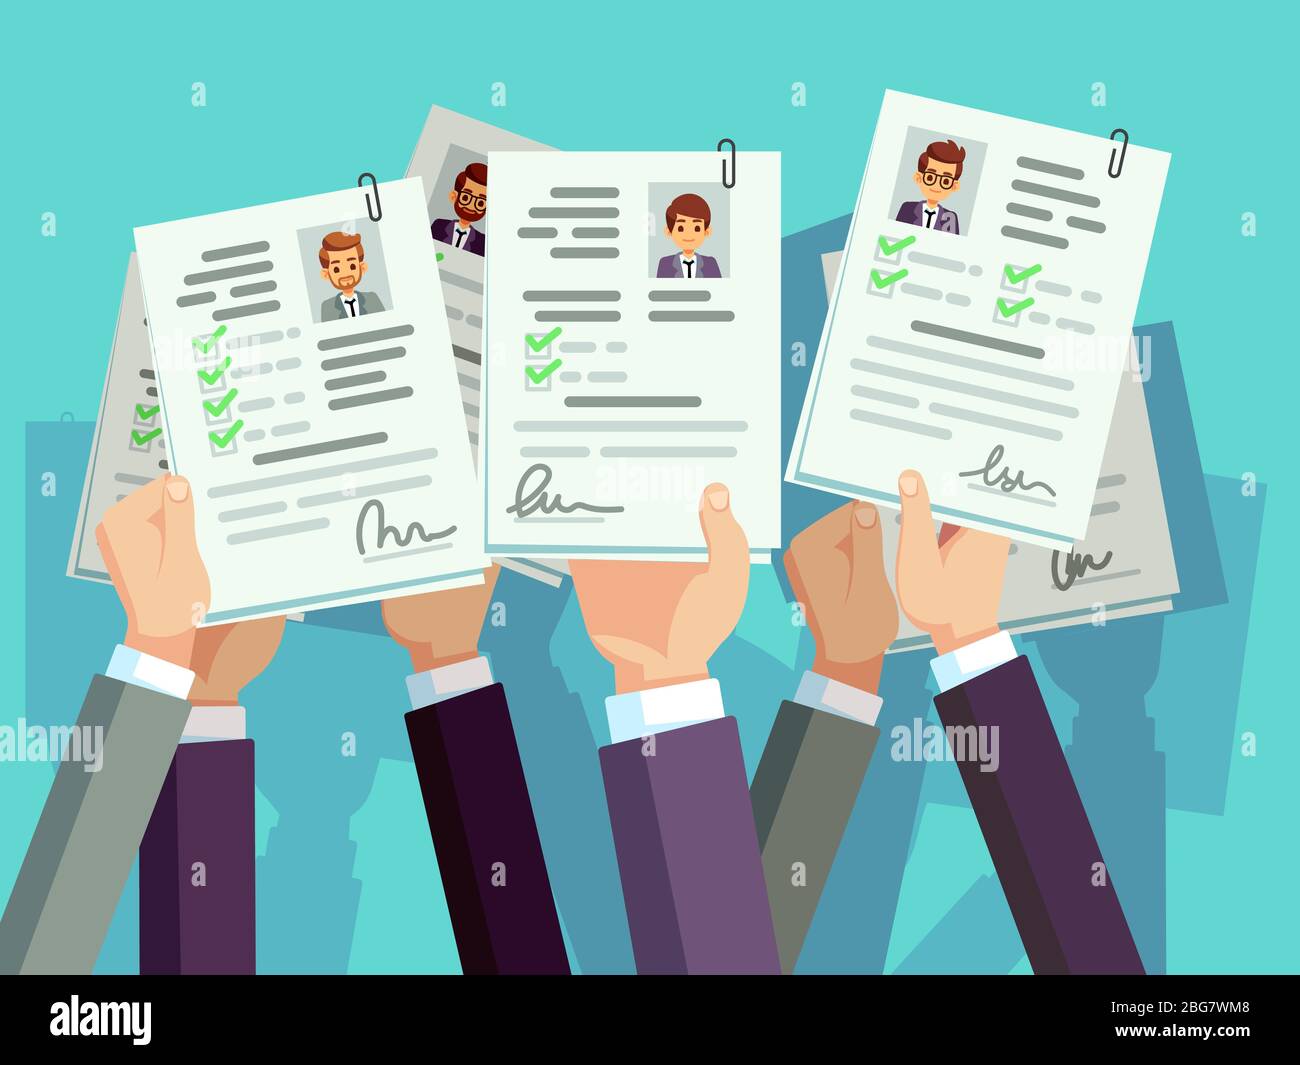 Job competition. Candidates hold cv resume. Recruitment and human resource vector concept. Illustration of resume candidate illustration Stock Vector